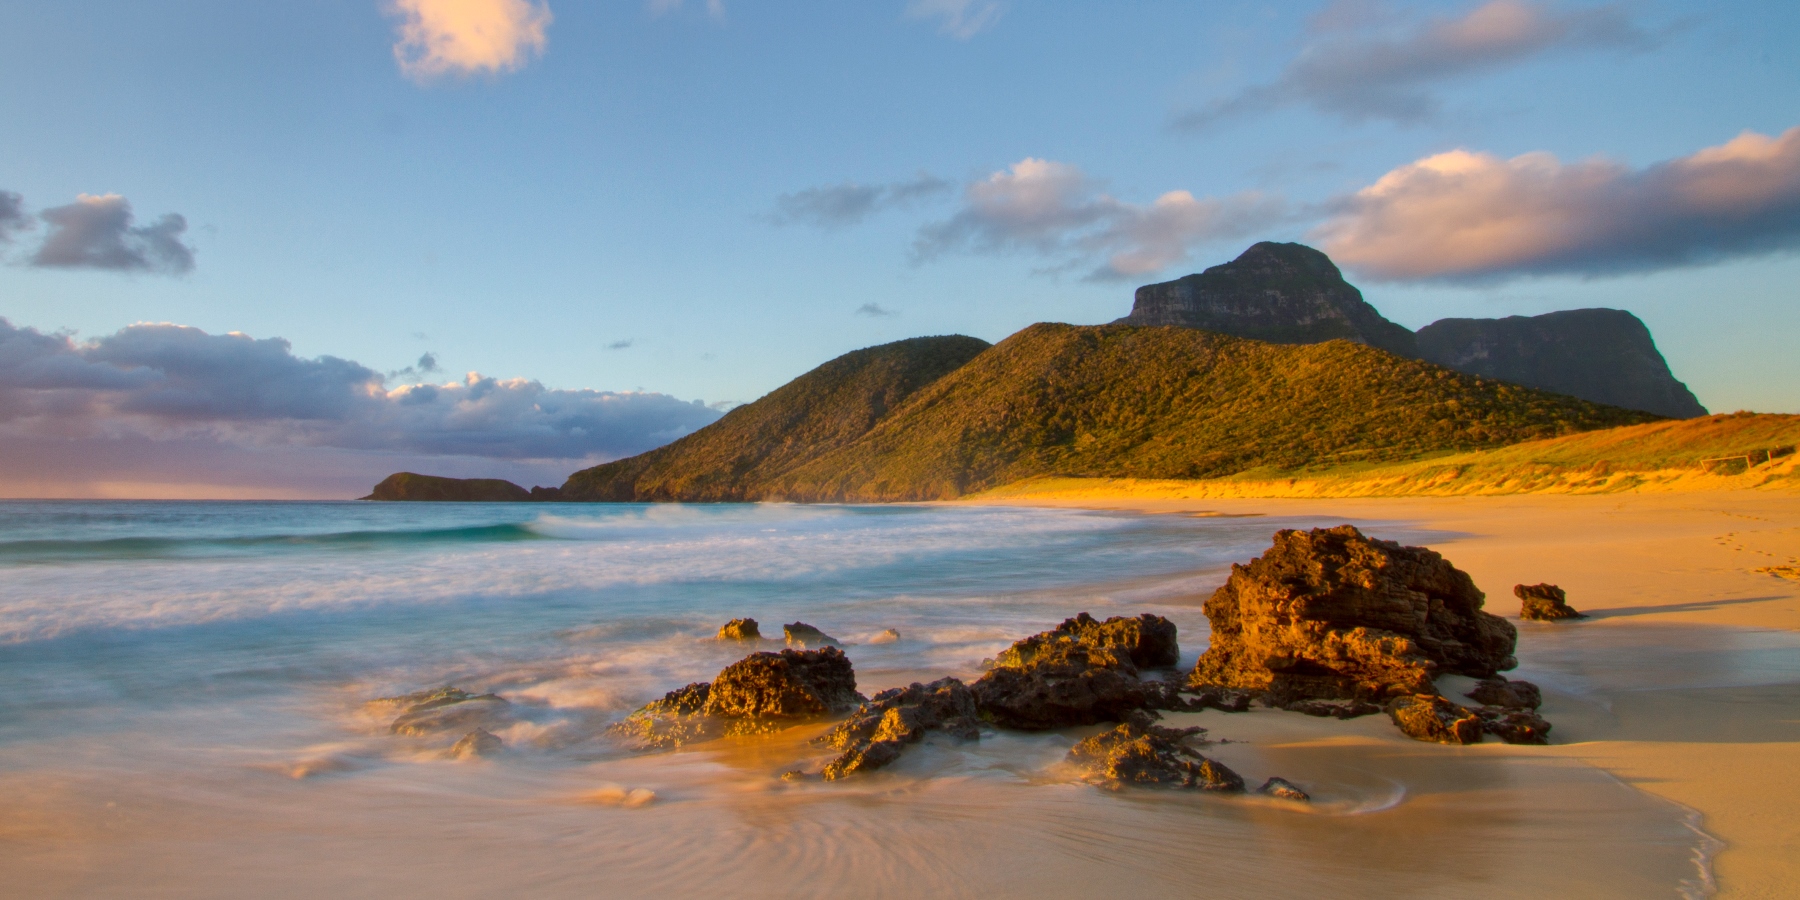 The scenery of Lord Howe Island